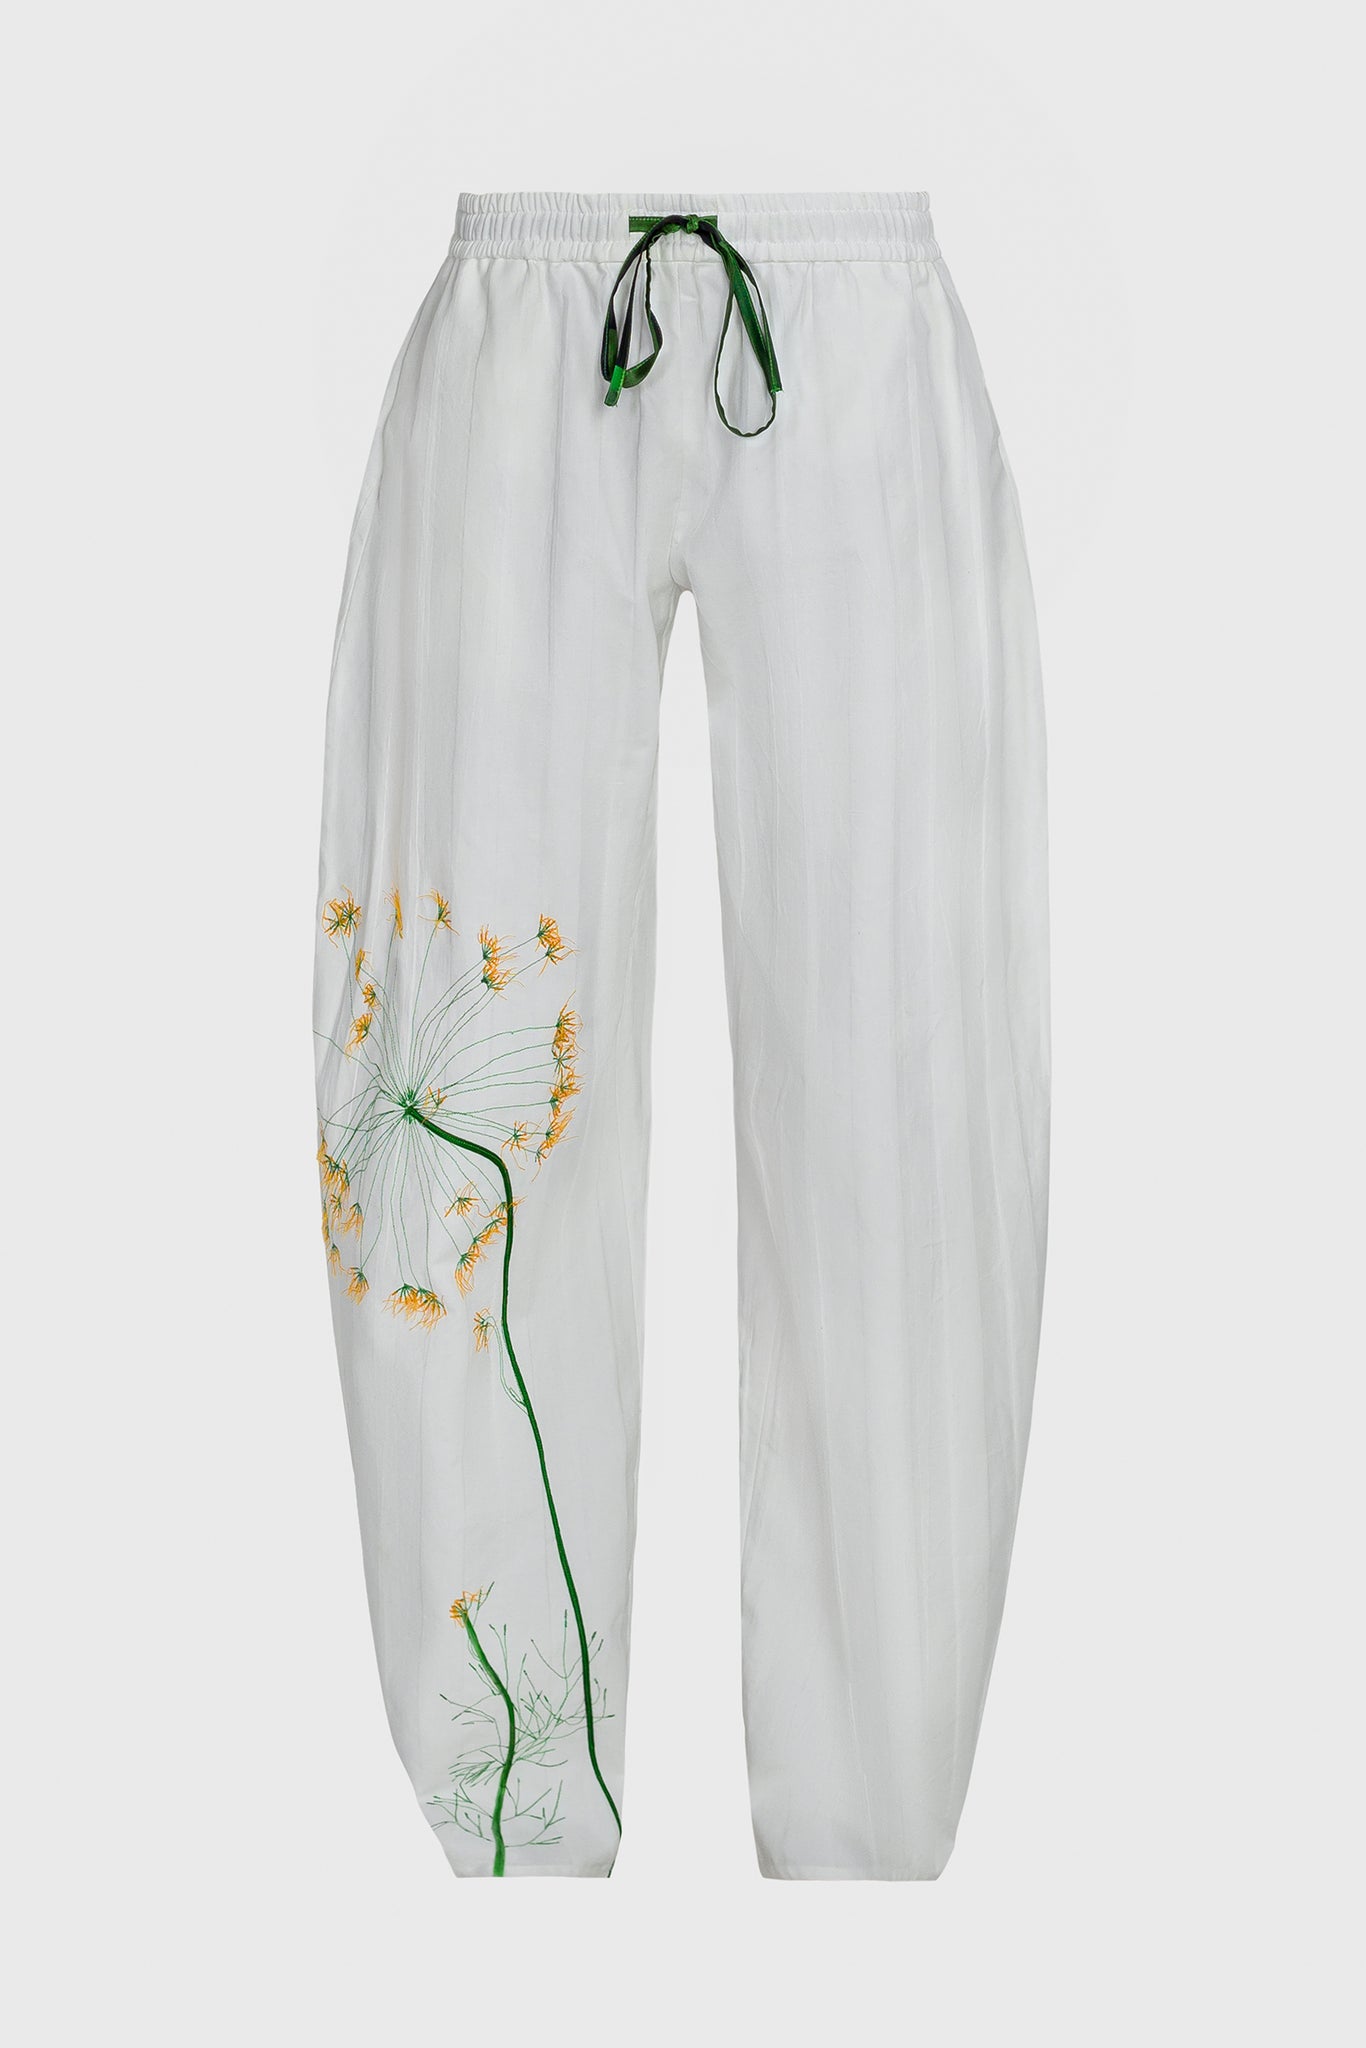 Ruxandra signature pants silhouette, women's sportswear, maternity wear, drawstring for comfort, dill flower manual embroidery for an artful feel, highly detailed, artsy and natural, minimalist hippie, nature lovers, style with other white or black or green items